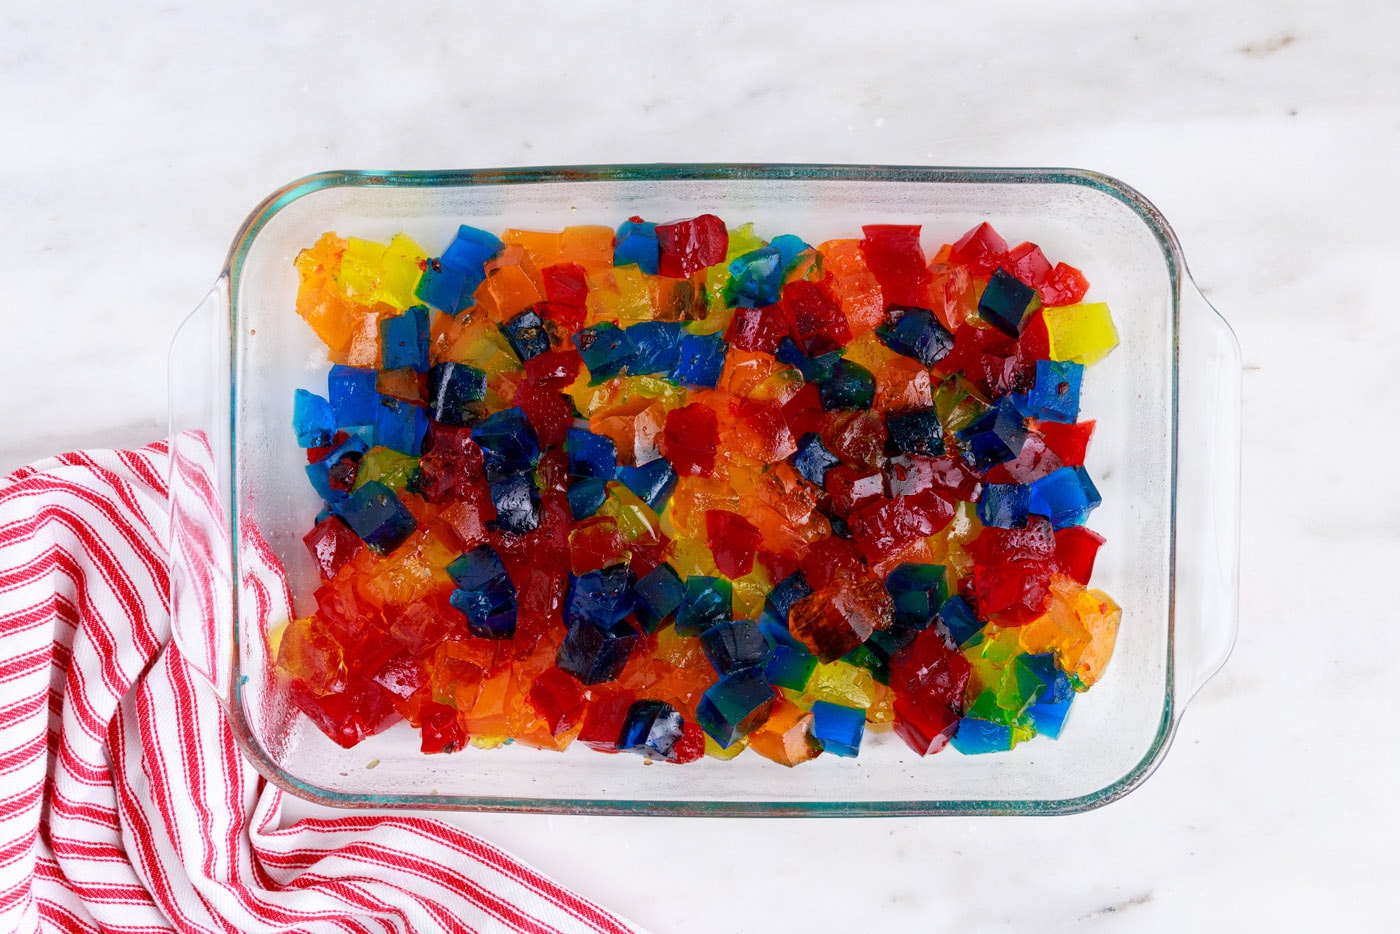 cubed jello pieces in a baking dish